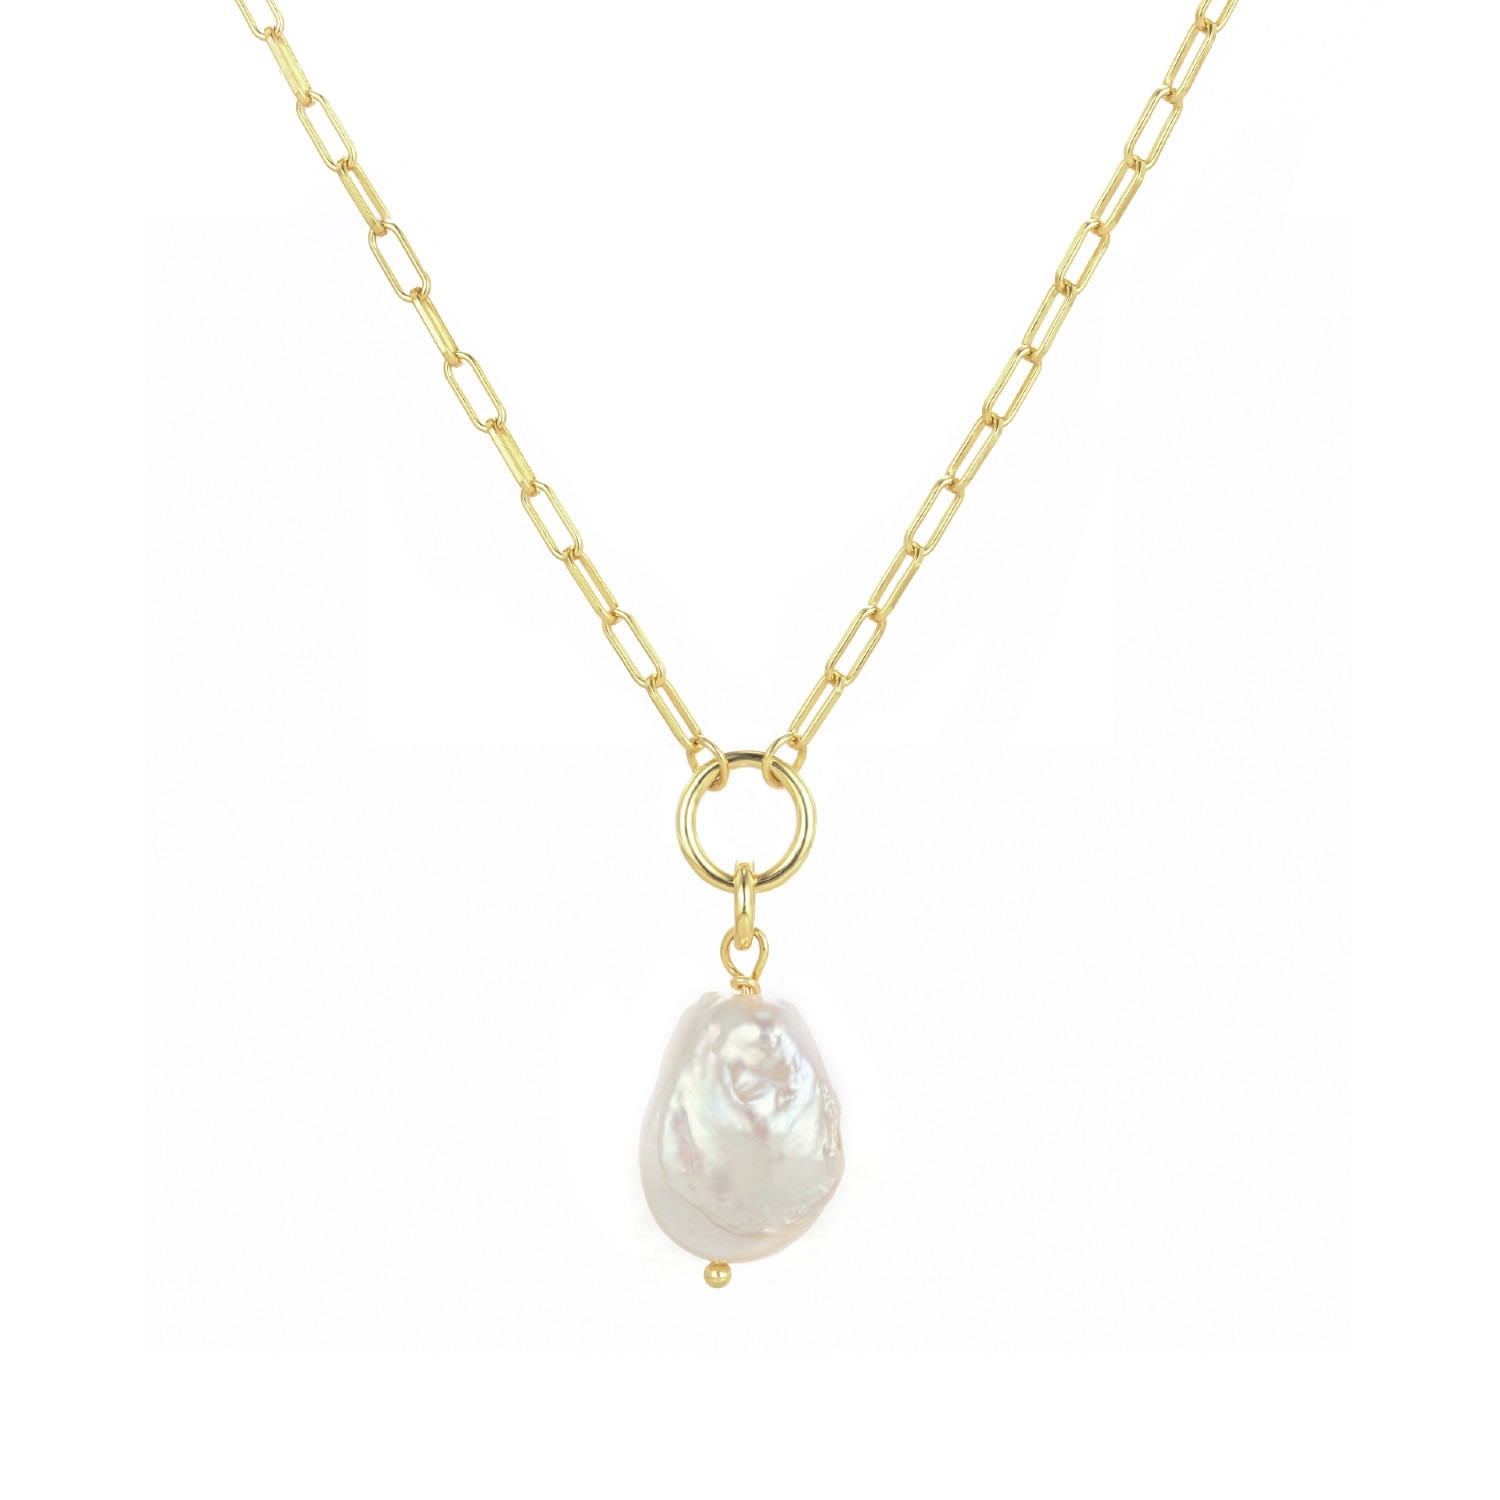 Women’s Natural Baroque Pearl Lulu Necklace - Gold Cvlcha